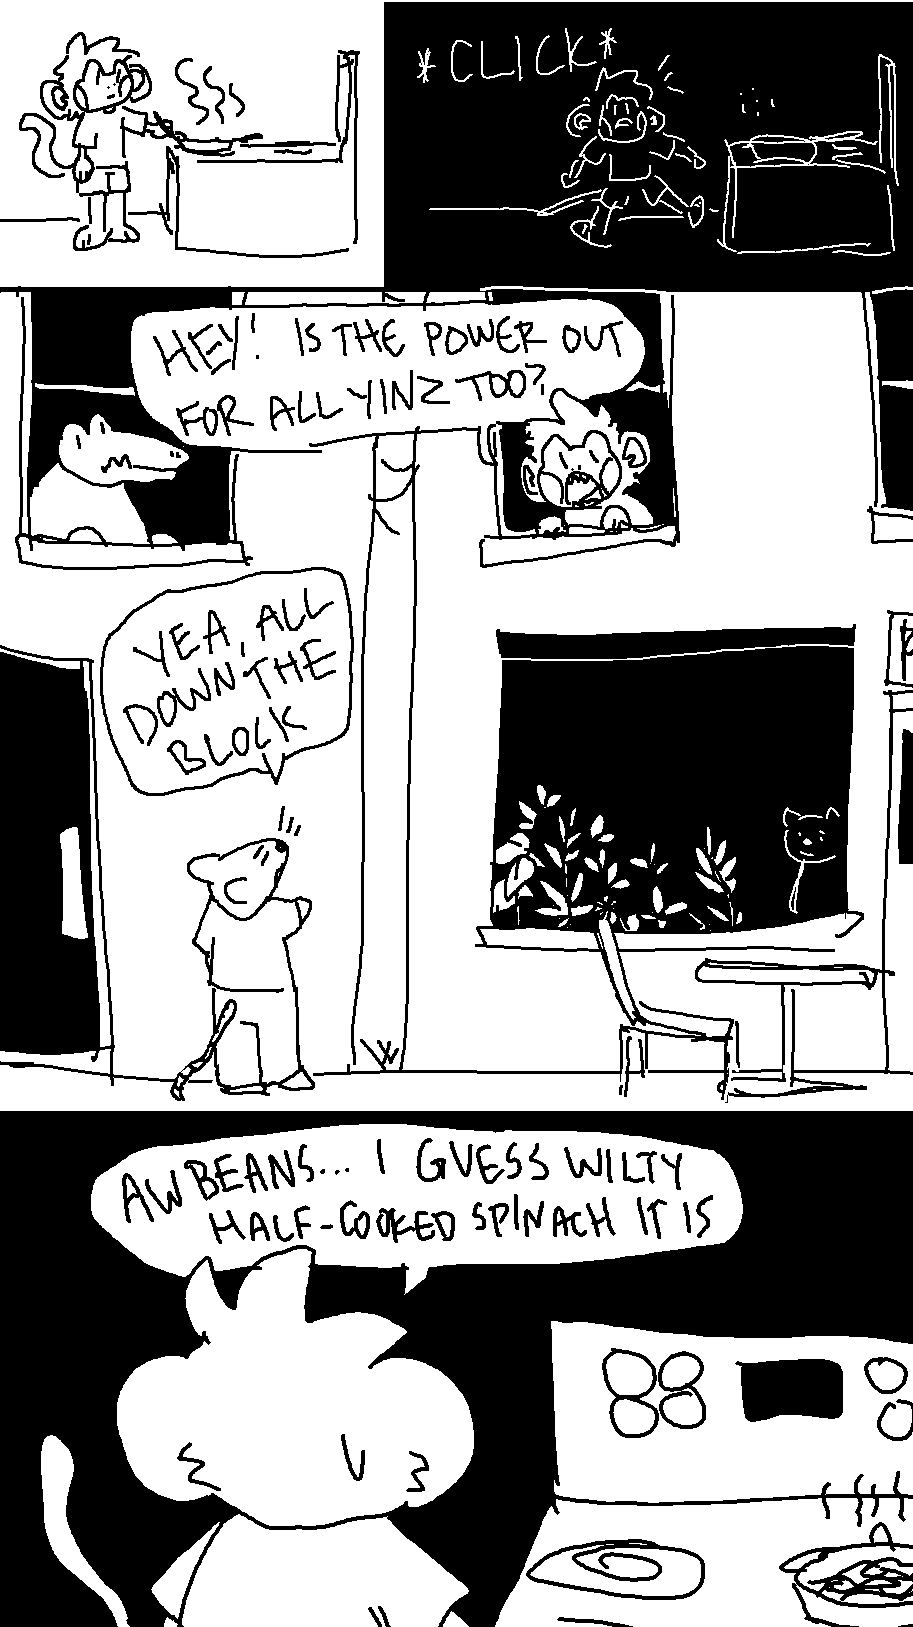 a black and white comic drawn in mspaint. bug is cooking on the stove when the lights suddenly click off; he calls out the window to ask if the power is out, and a rat responds that it's out all the way down the block! bug looks back at the stove... aw beans, i guess half-cooked wilty spinach it is